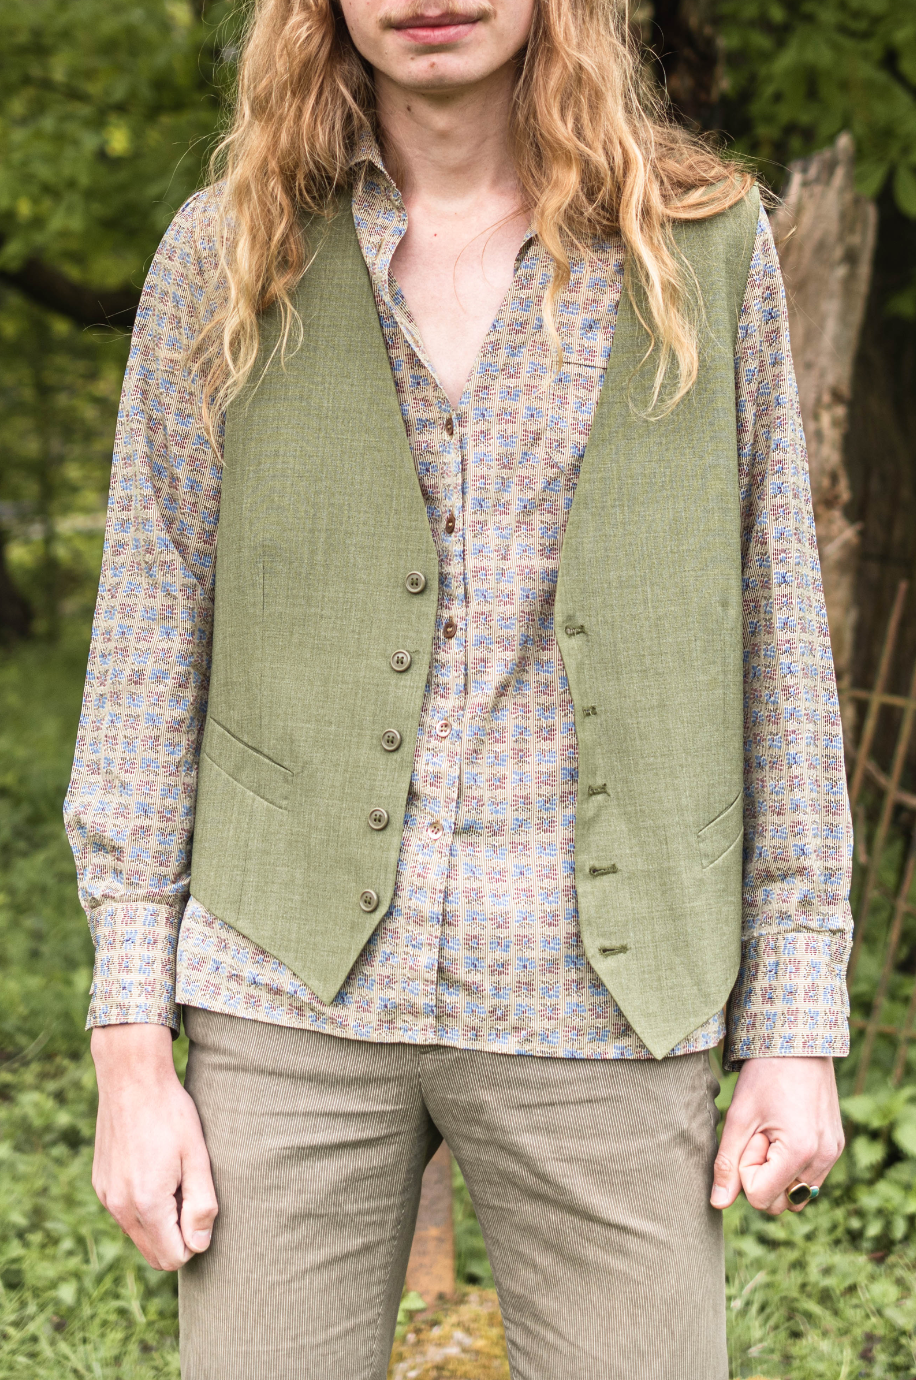 NEW IN! Olive coloured waistcoat